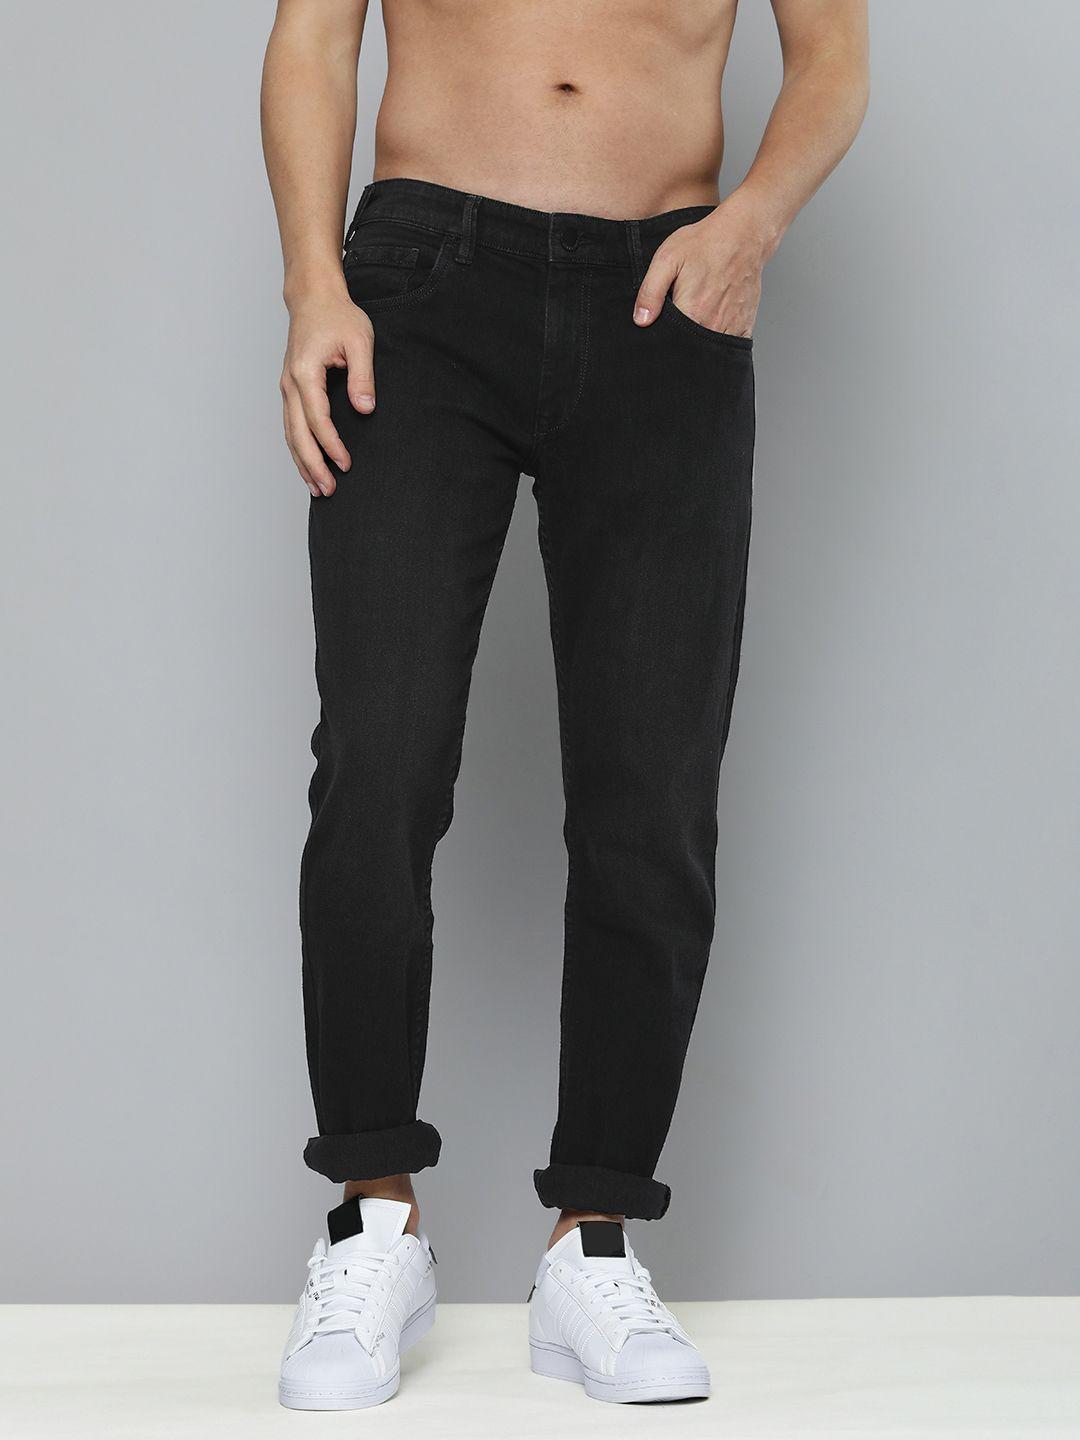 here&now men black slim fit light fade stretchable jeans